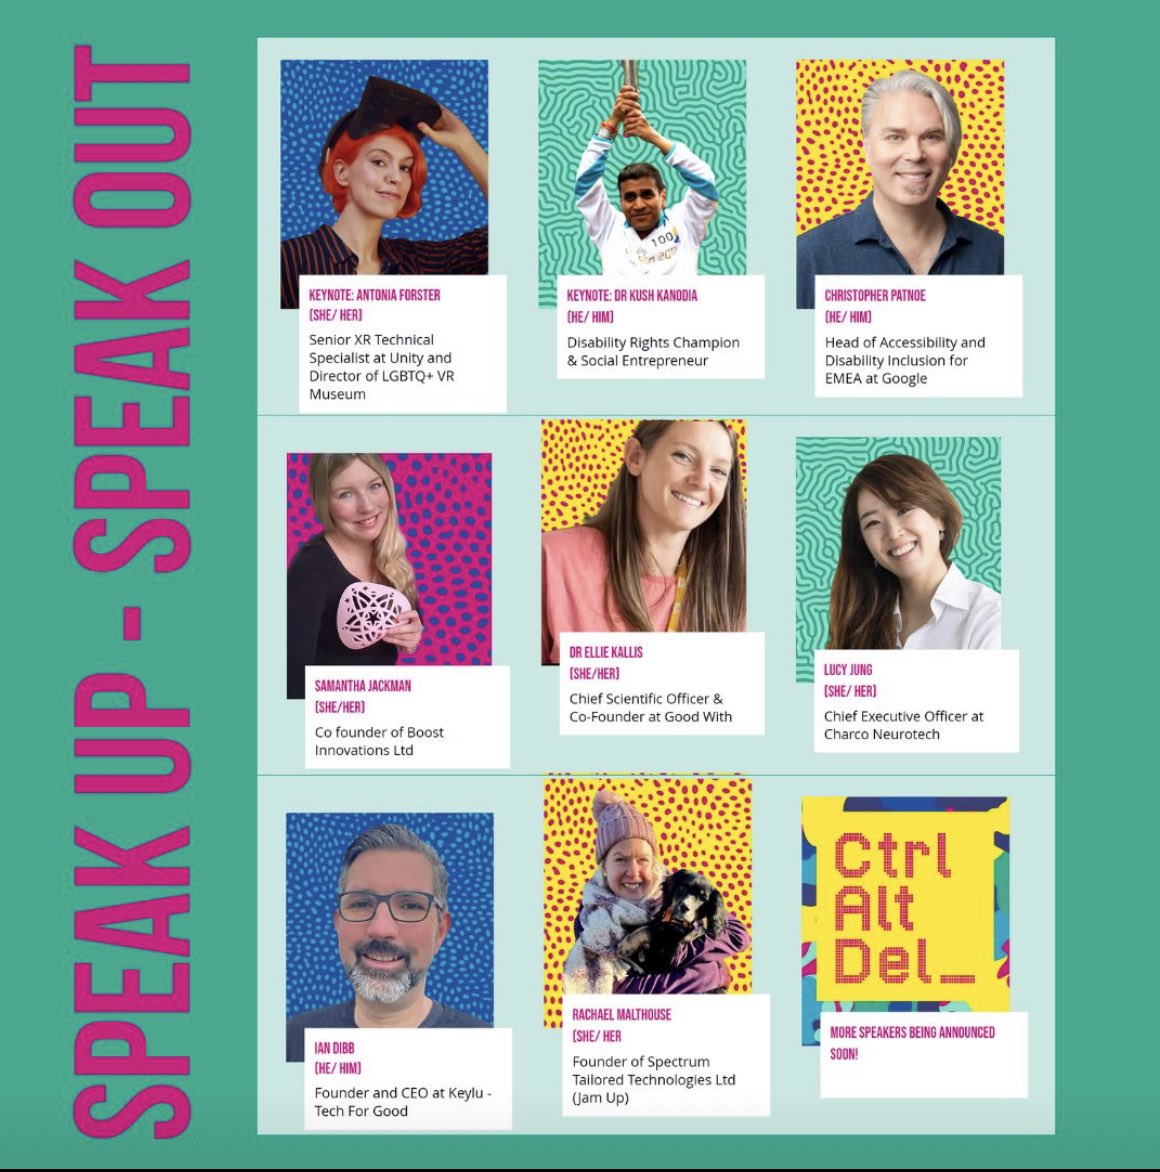 Very excited about our expanding lineup of amazing speakers for Ctrl Alt Del including keynotes from @AntoniaRForster @KushKanodia , speakers from @Accenture and @Google and some brilliant start ups! Have you got tickets?!? #Accessibility #inclusion ctrlaltdelsummit.com/speakers